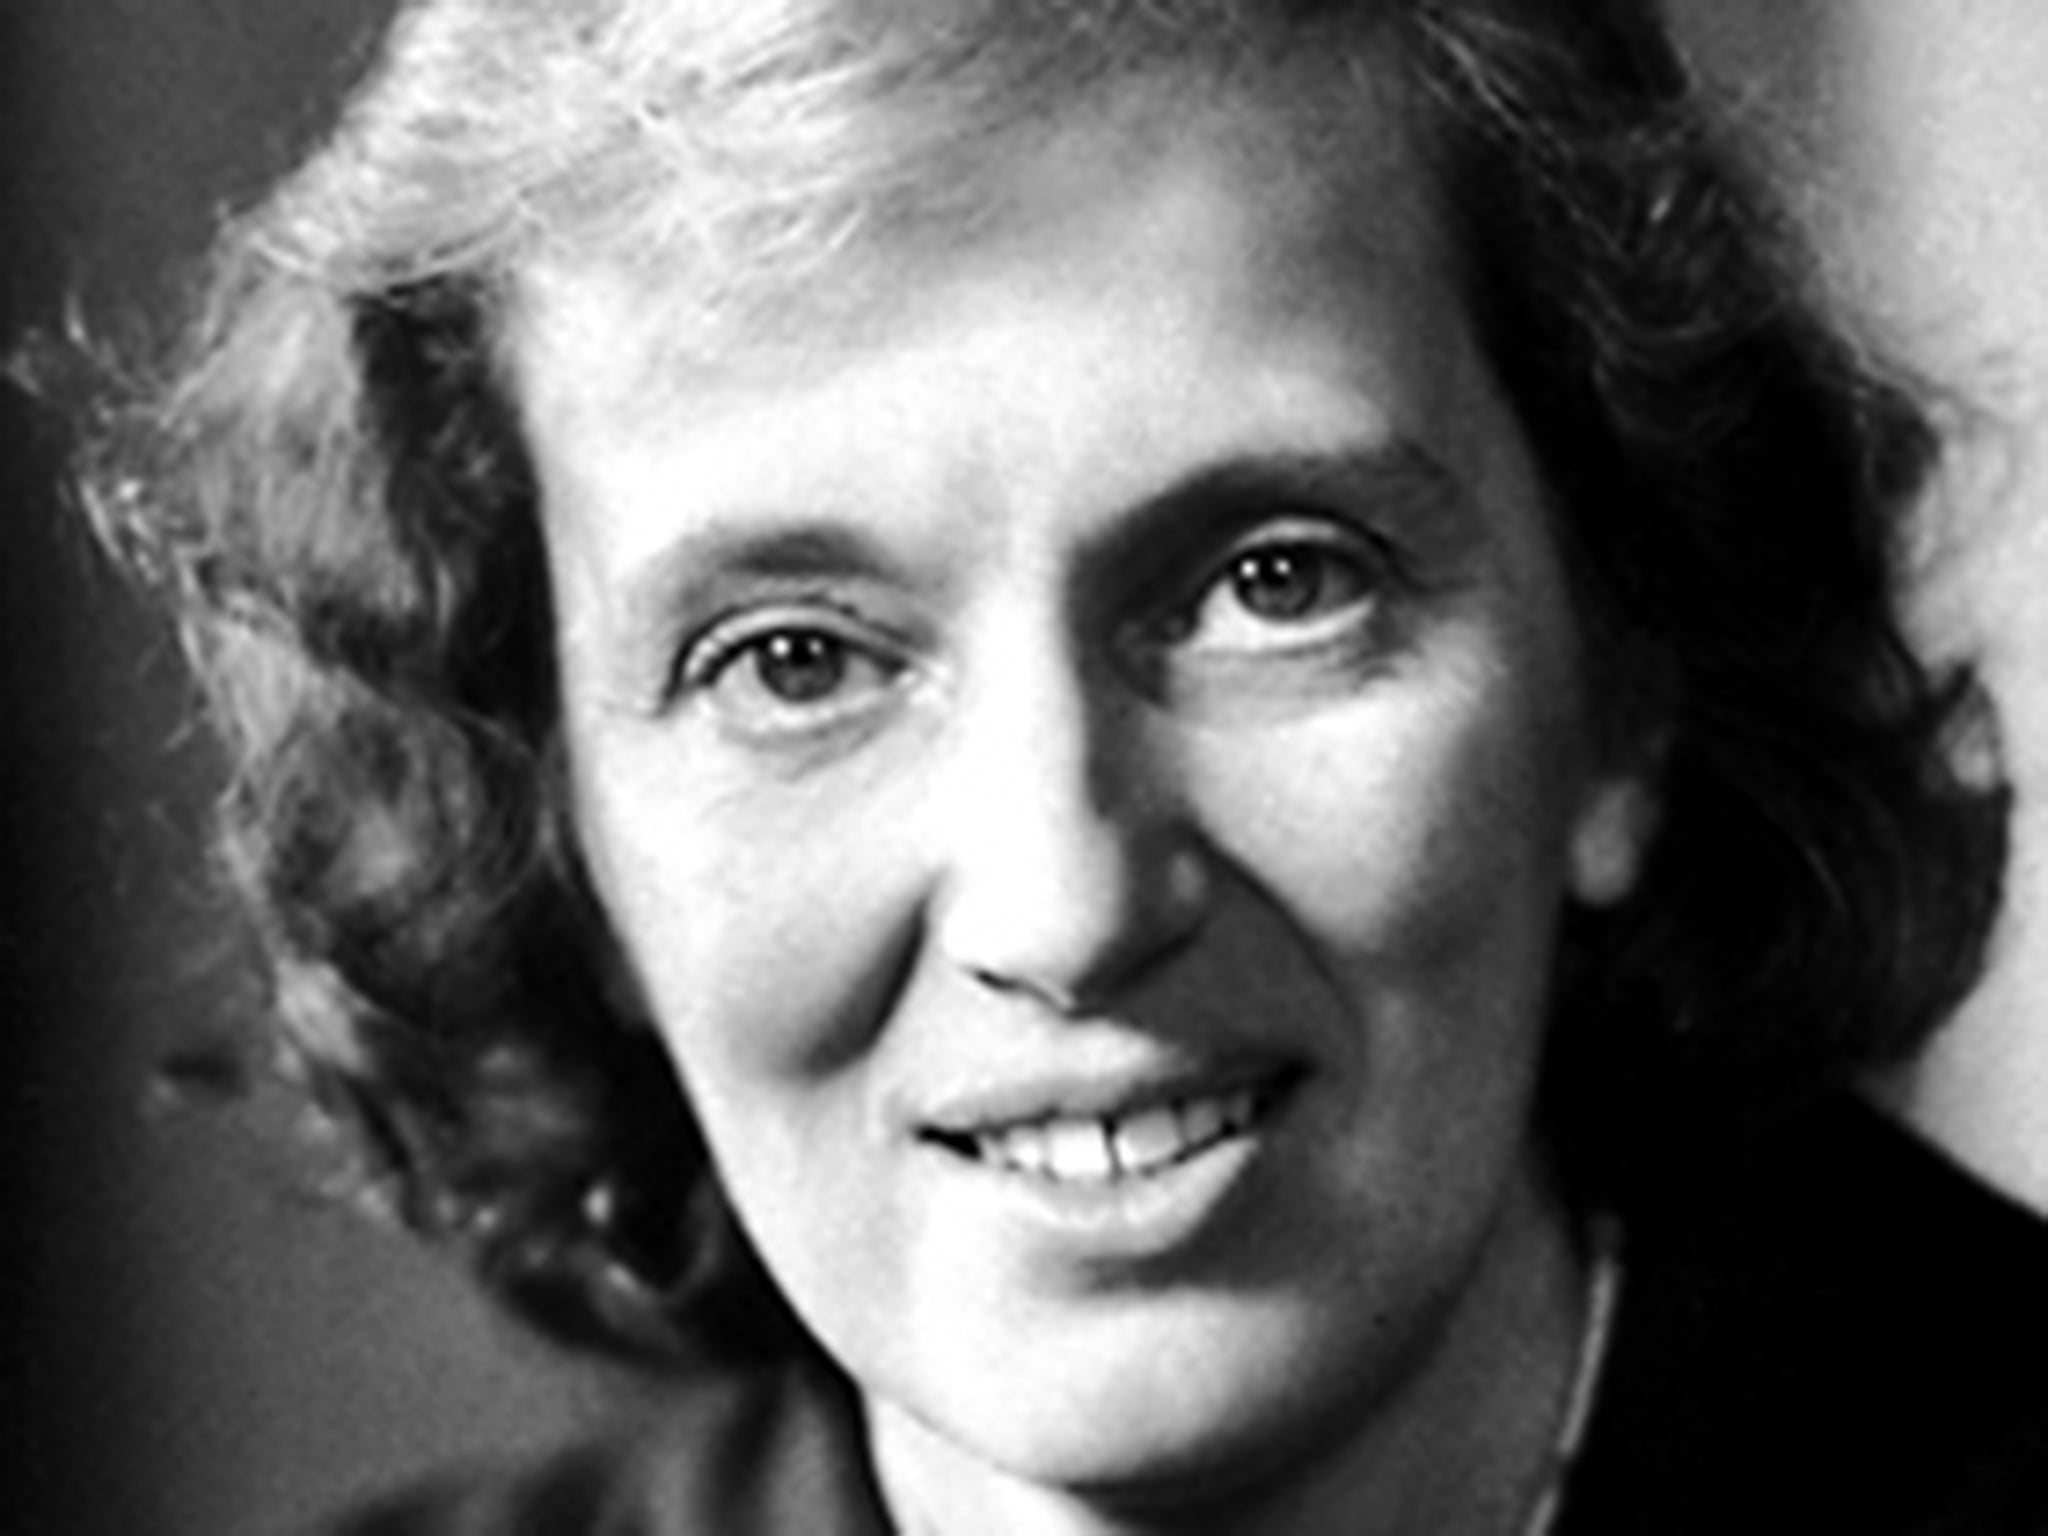 Dorothy Mary Hodgkin (12 May 1910 – 29 July 1994), known professionally as Dorothy Crowfoot Hodgkin or simply Dorothy Hodgkin, was a British biochemist who developed protein crystallography, for which she won the Nobel Prize in Chemistry in 1964